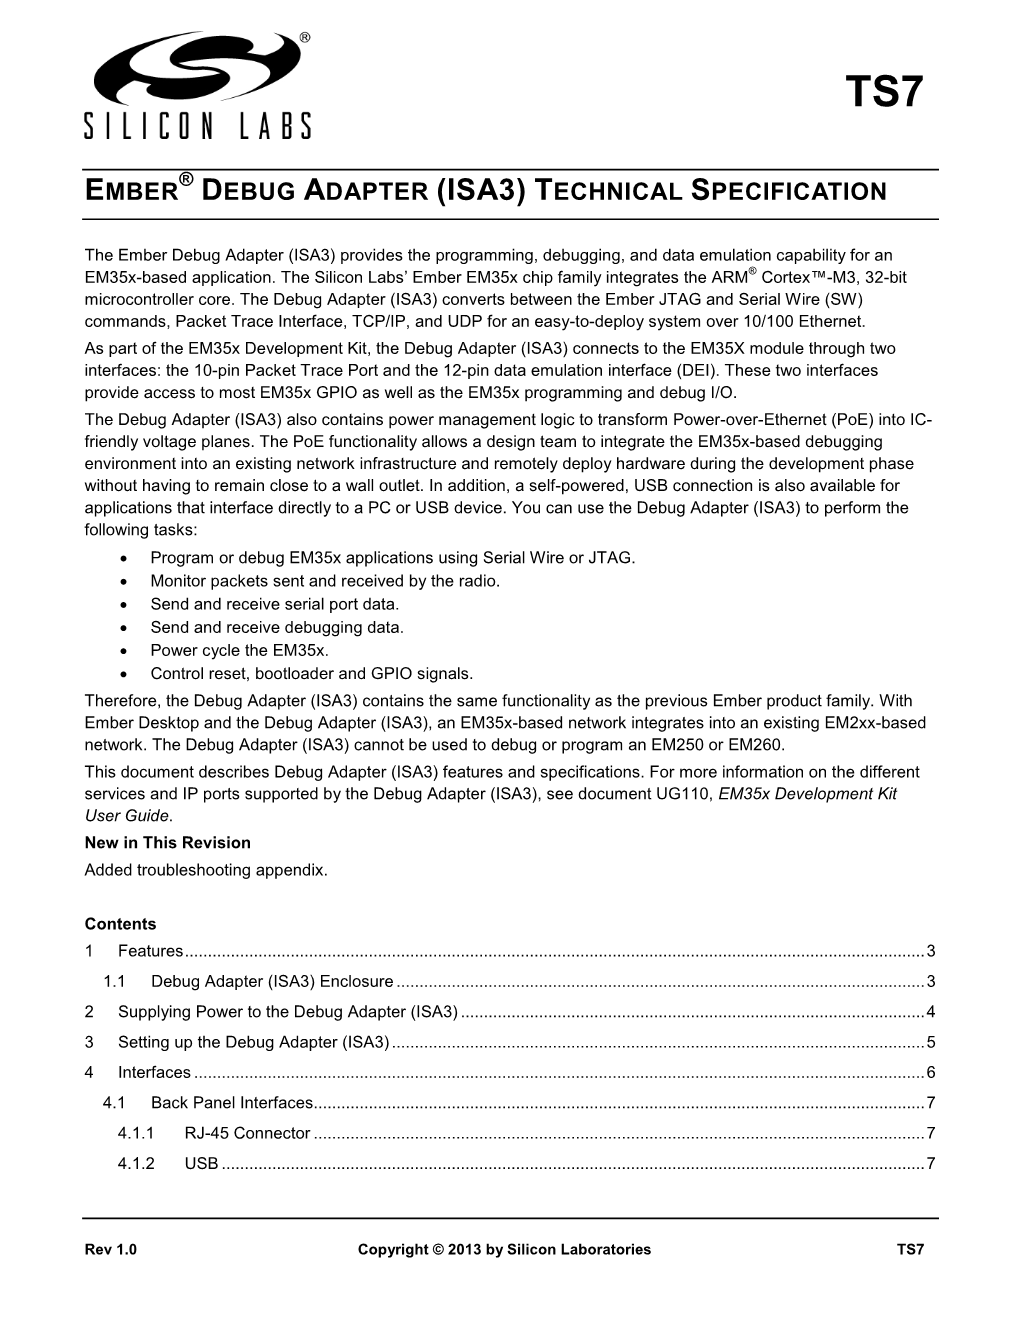 Ember Debug Adapter (Isa3) Technical Specification